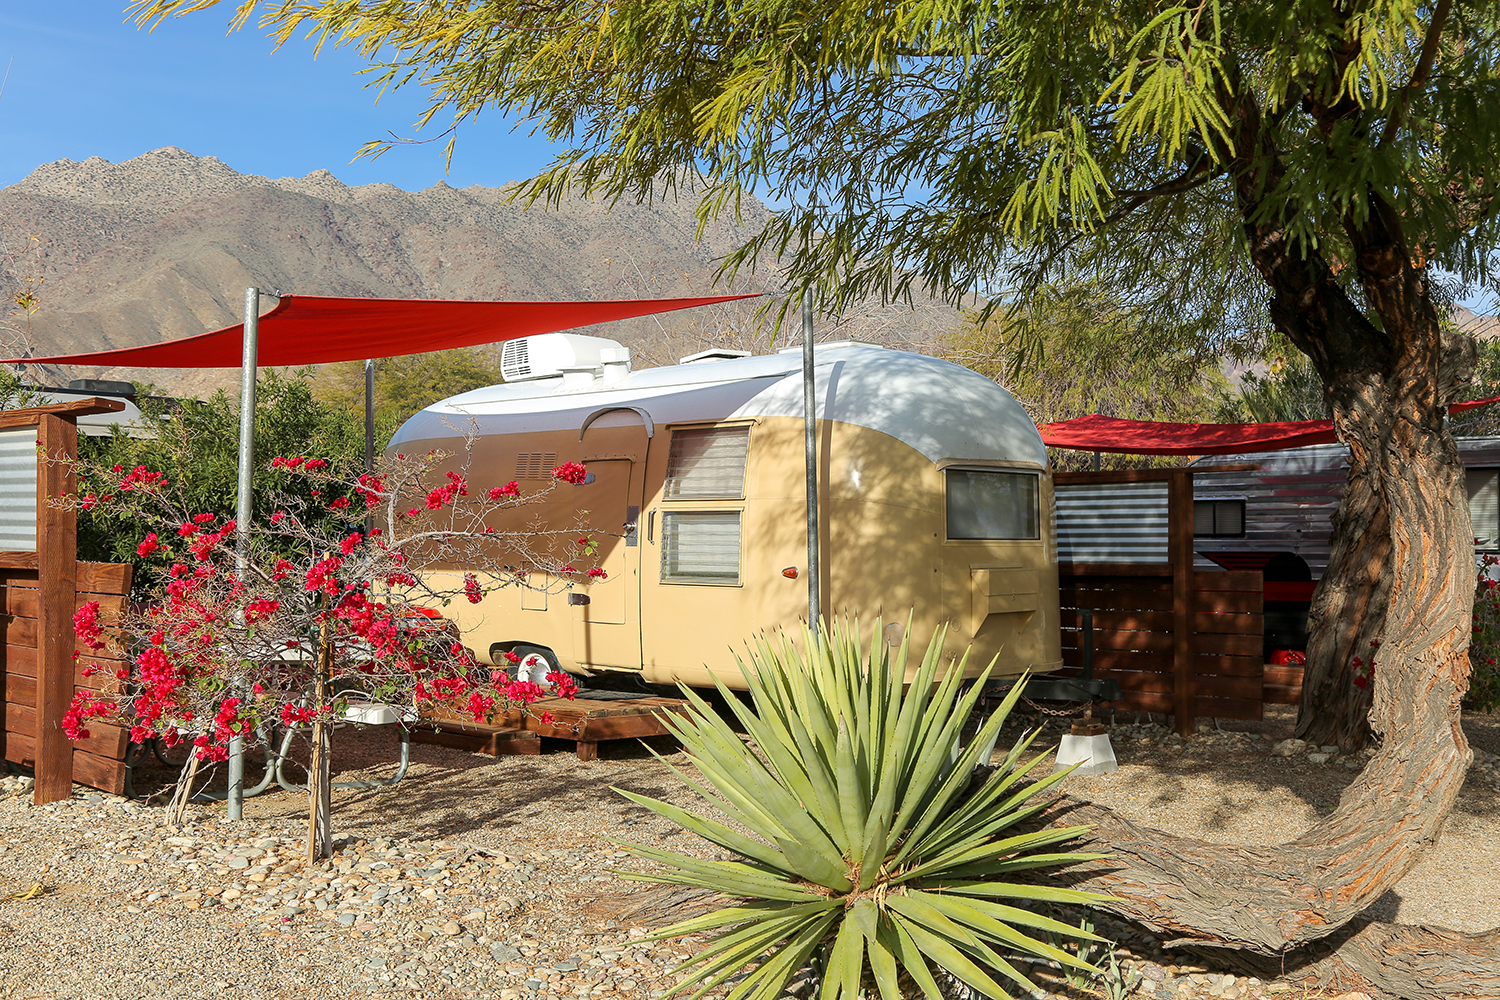 Photo of a yellow and white vintage trailer with a red tarp to shade the outdoor use area with various desert plants surrounding it at the Palm Canyon Hotel & RV Resort in Borrego Springs, California.